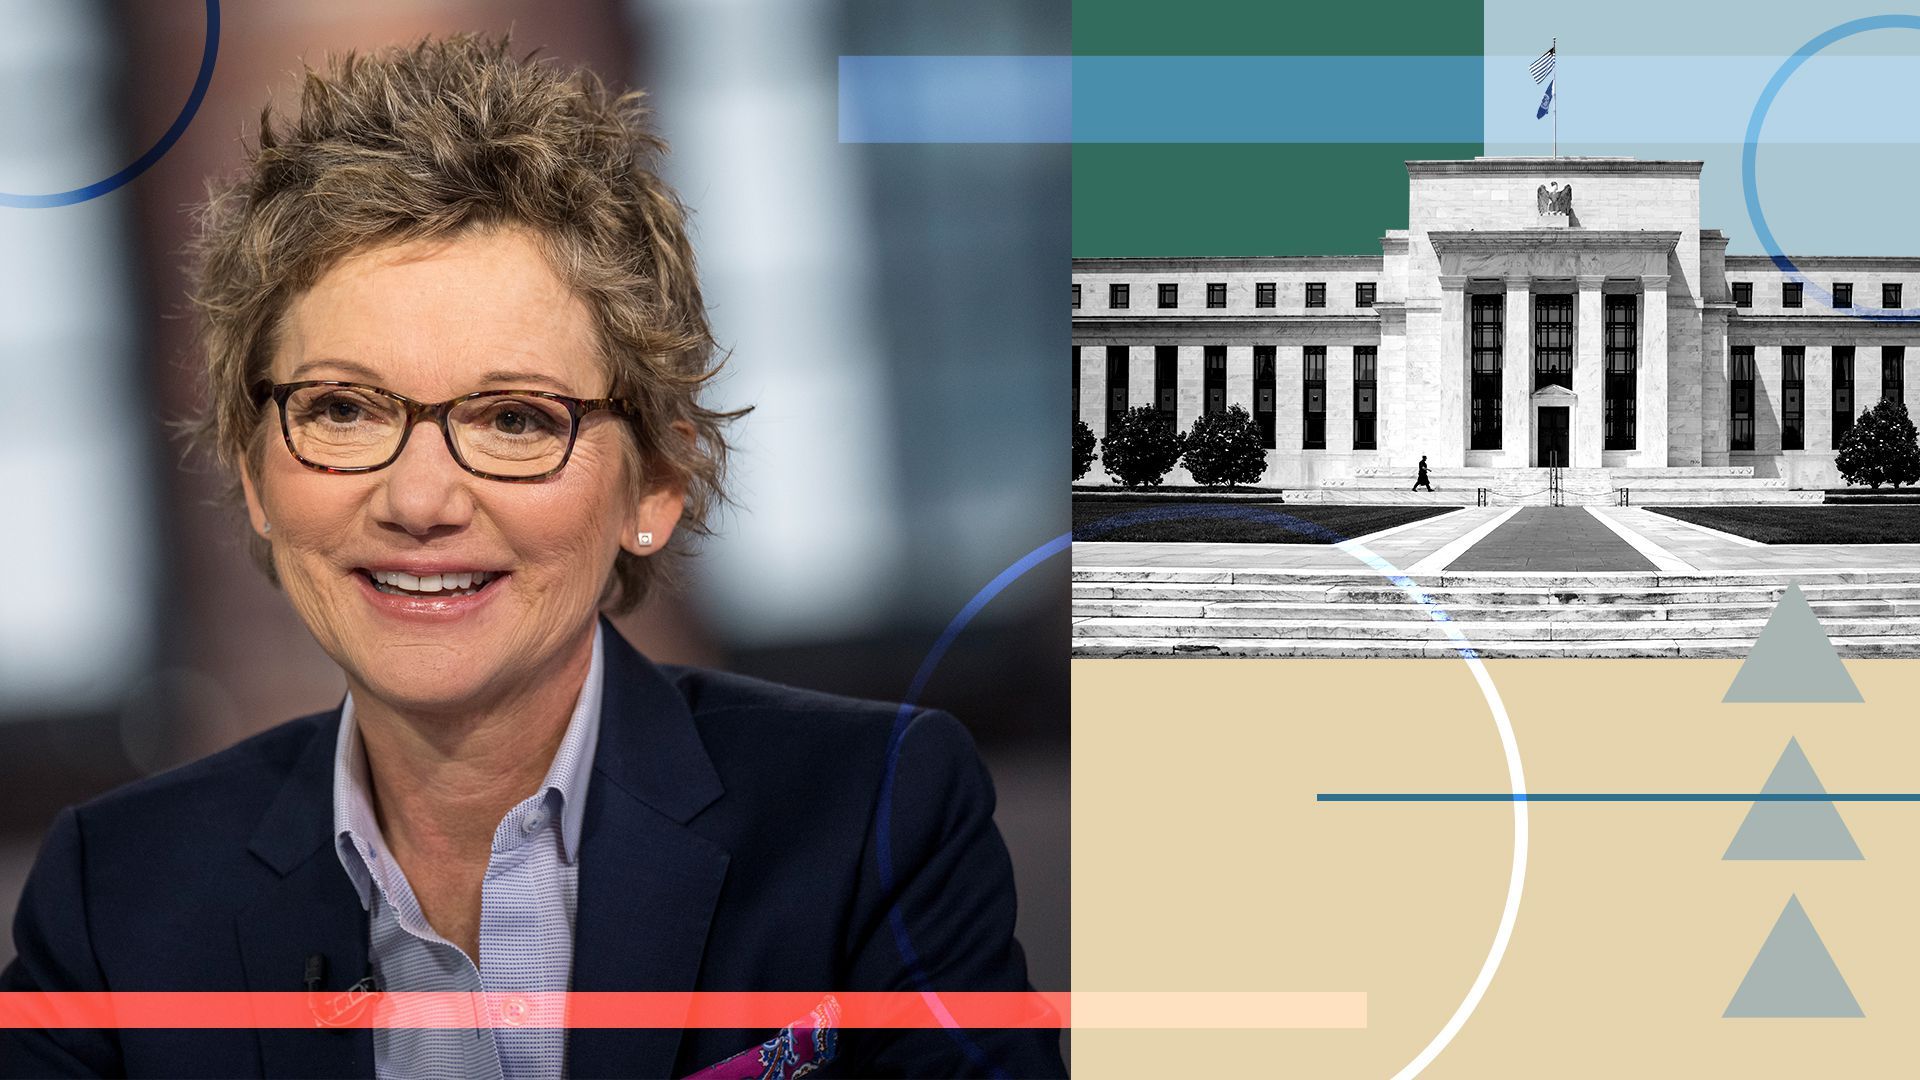 Photo illustration of Mary Daly, the Federal Reserve building and abstract shapes.